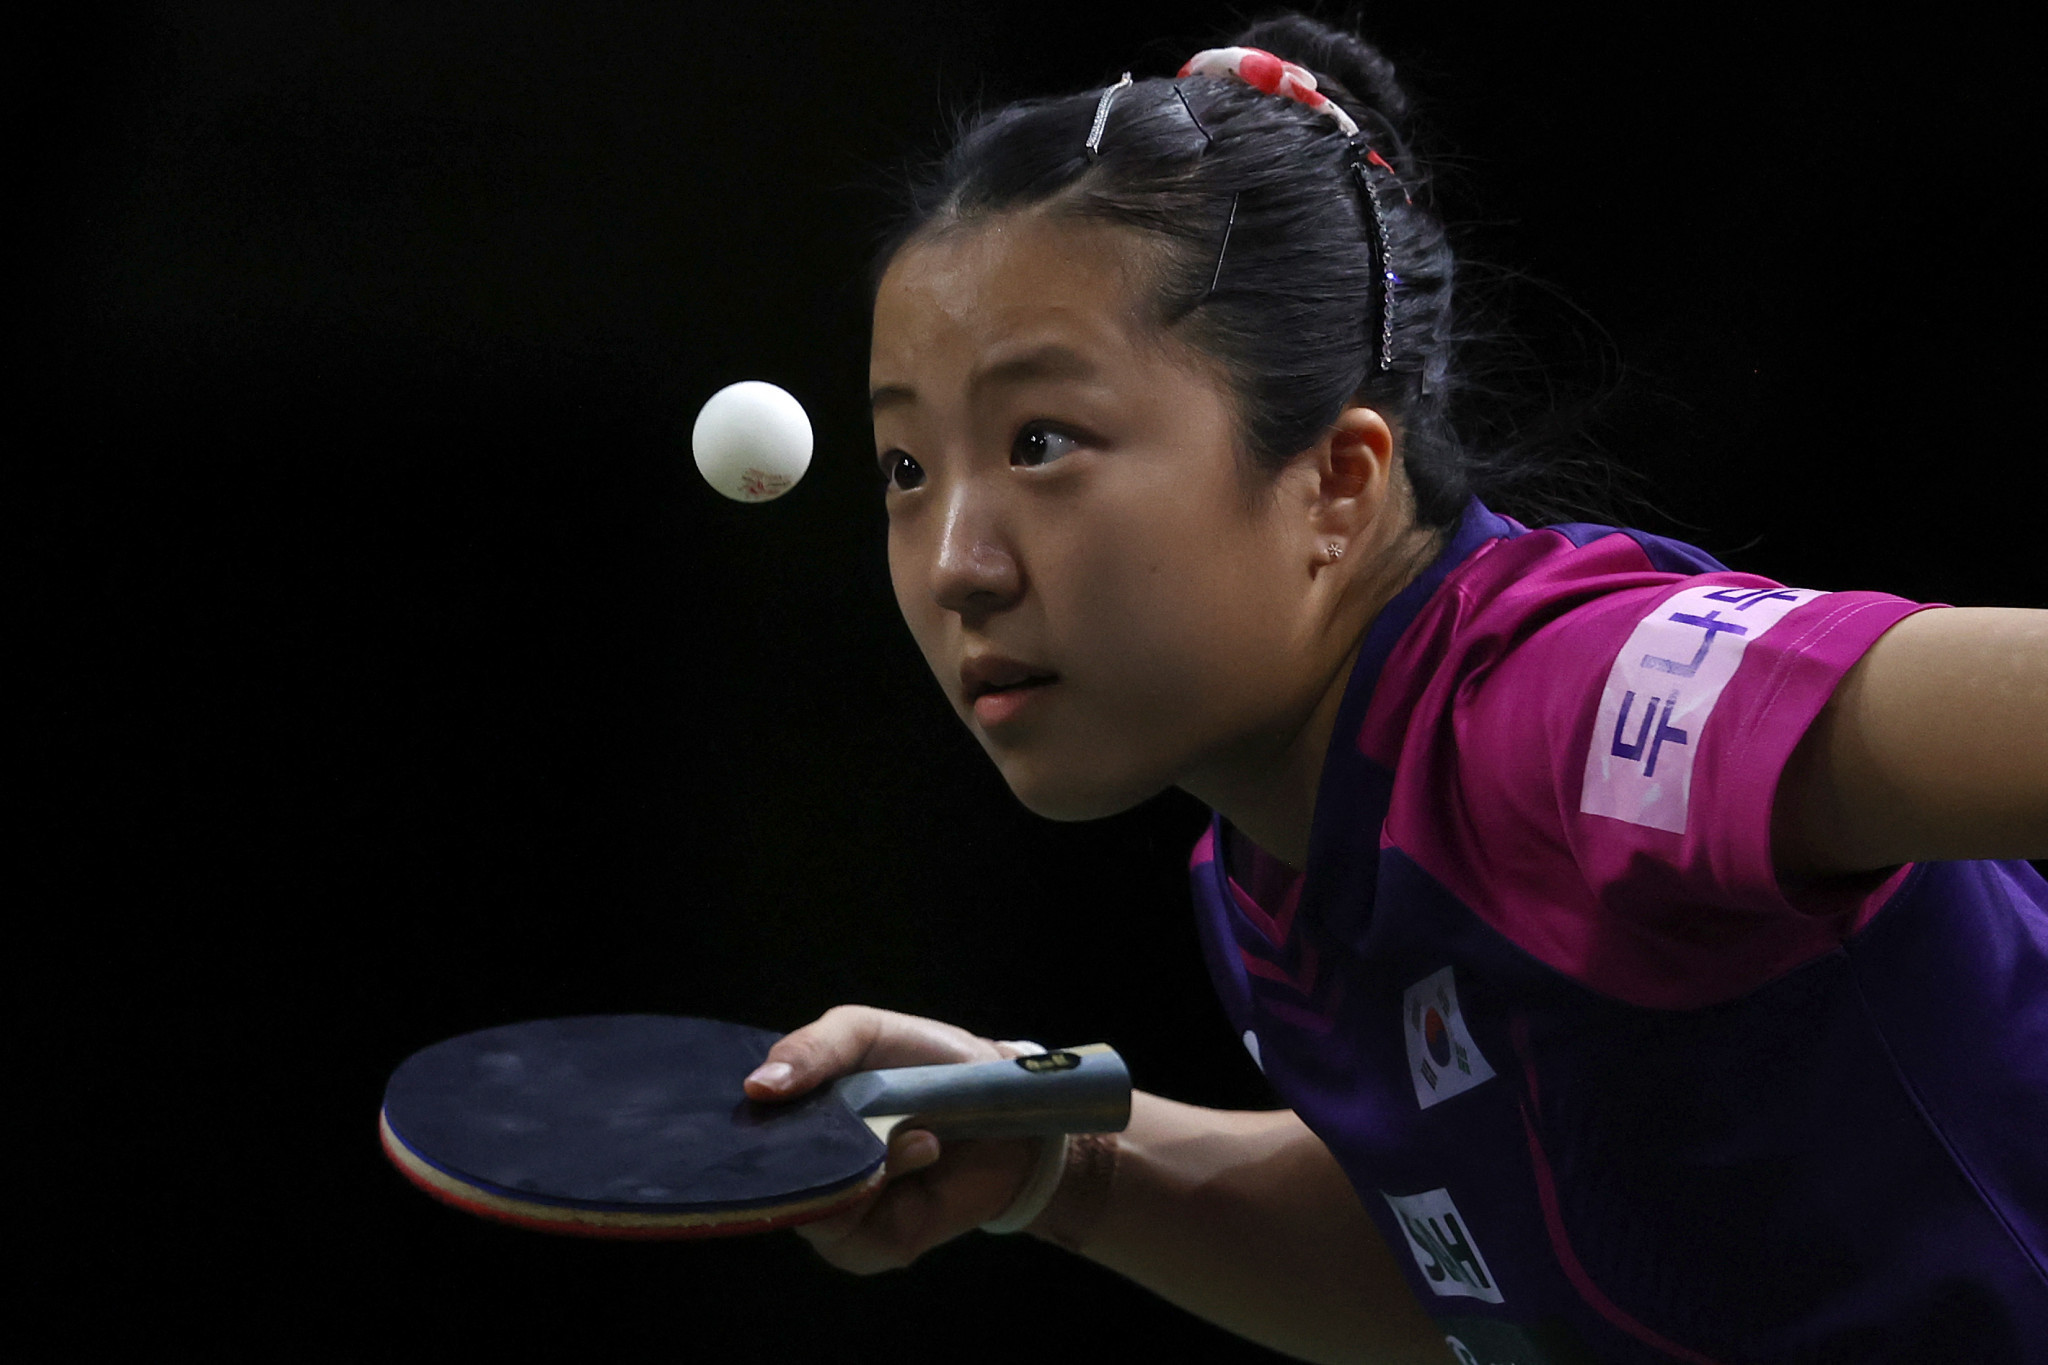 Shin Yu-Bin took gold with a six-game win over Yake Li in the women's singles final at the WTT Contender tournament in Lagos ©Getty Images